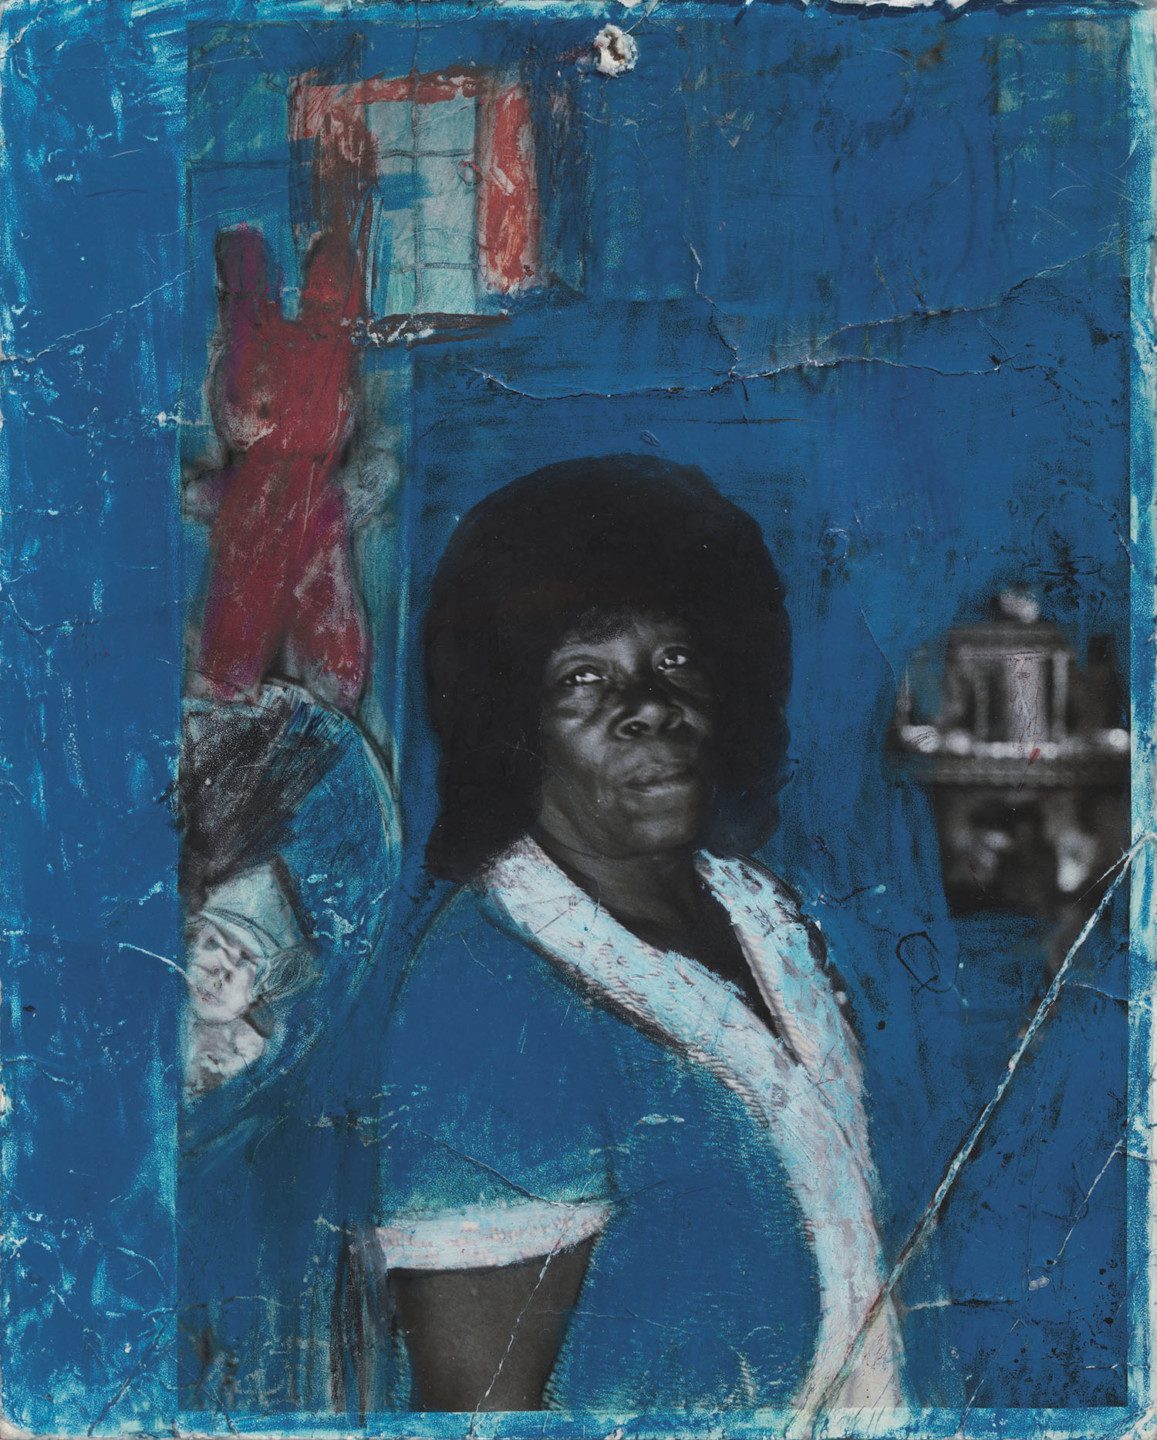 A black-and white photo of a person looking towards the camera, with blue and red paint surrounding it